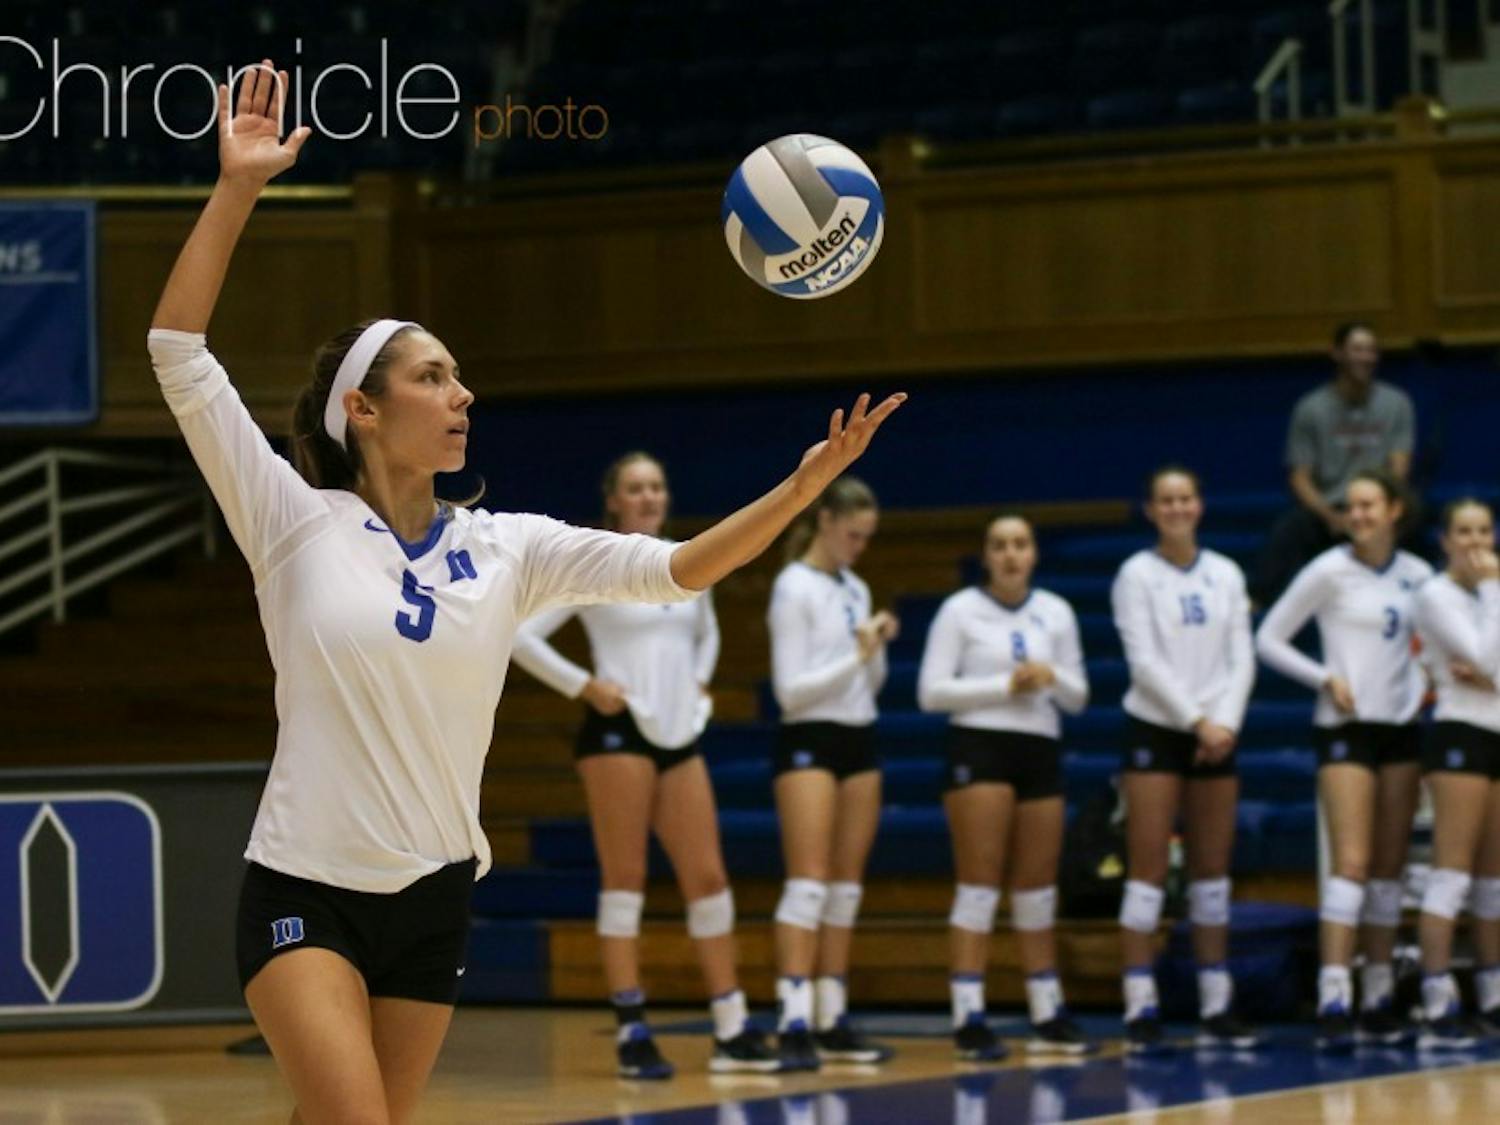 Nicole Elattrache was named the MVP of this weekend's Fight in the Fort, totaling 59 digs in the three matches.